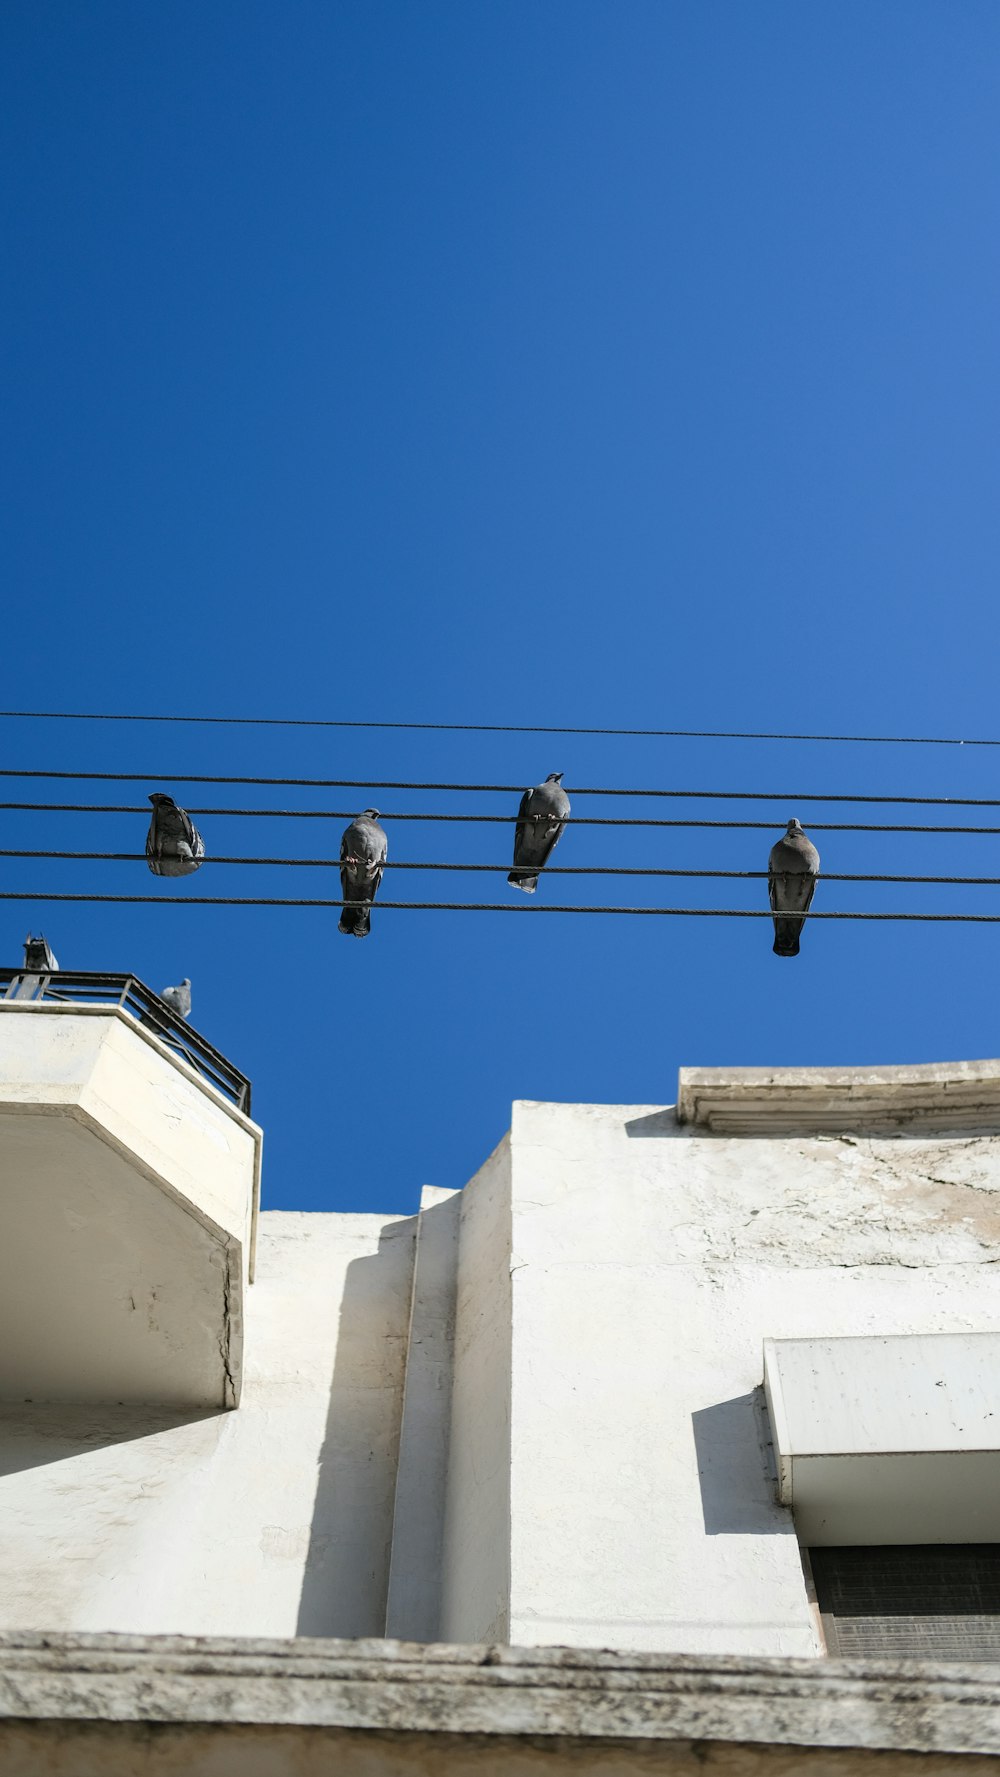 a group of birds sitting on a wire above a building